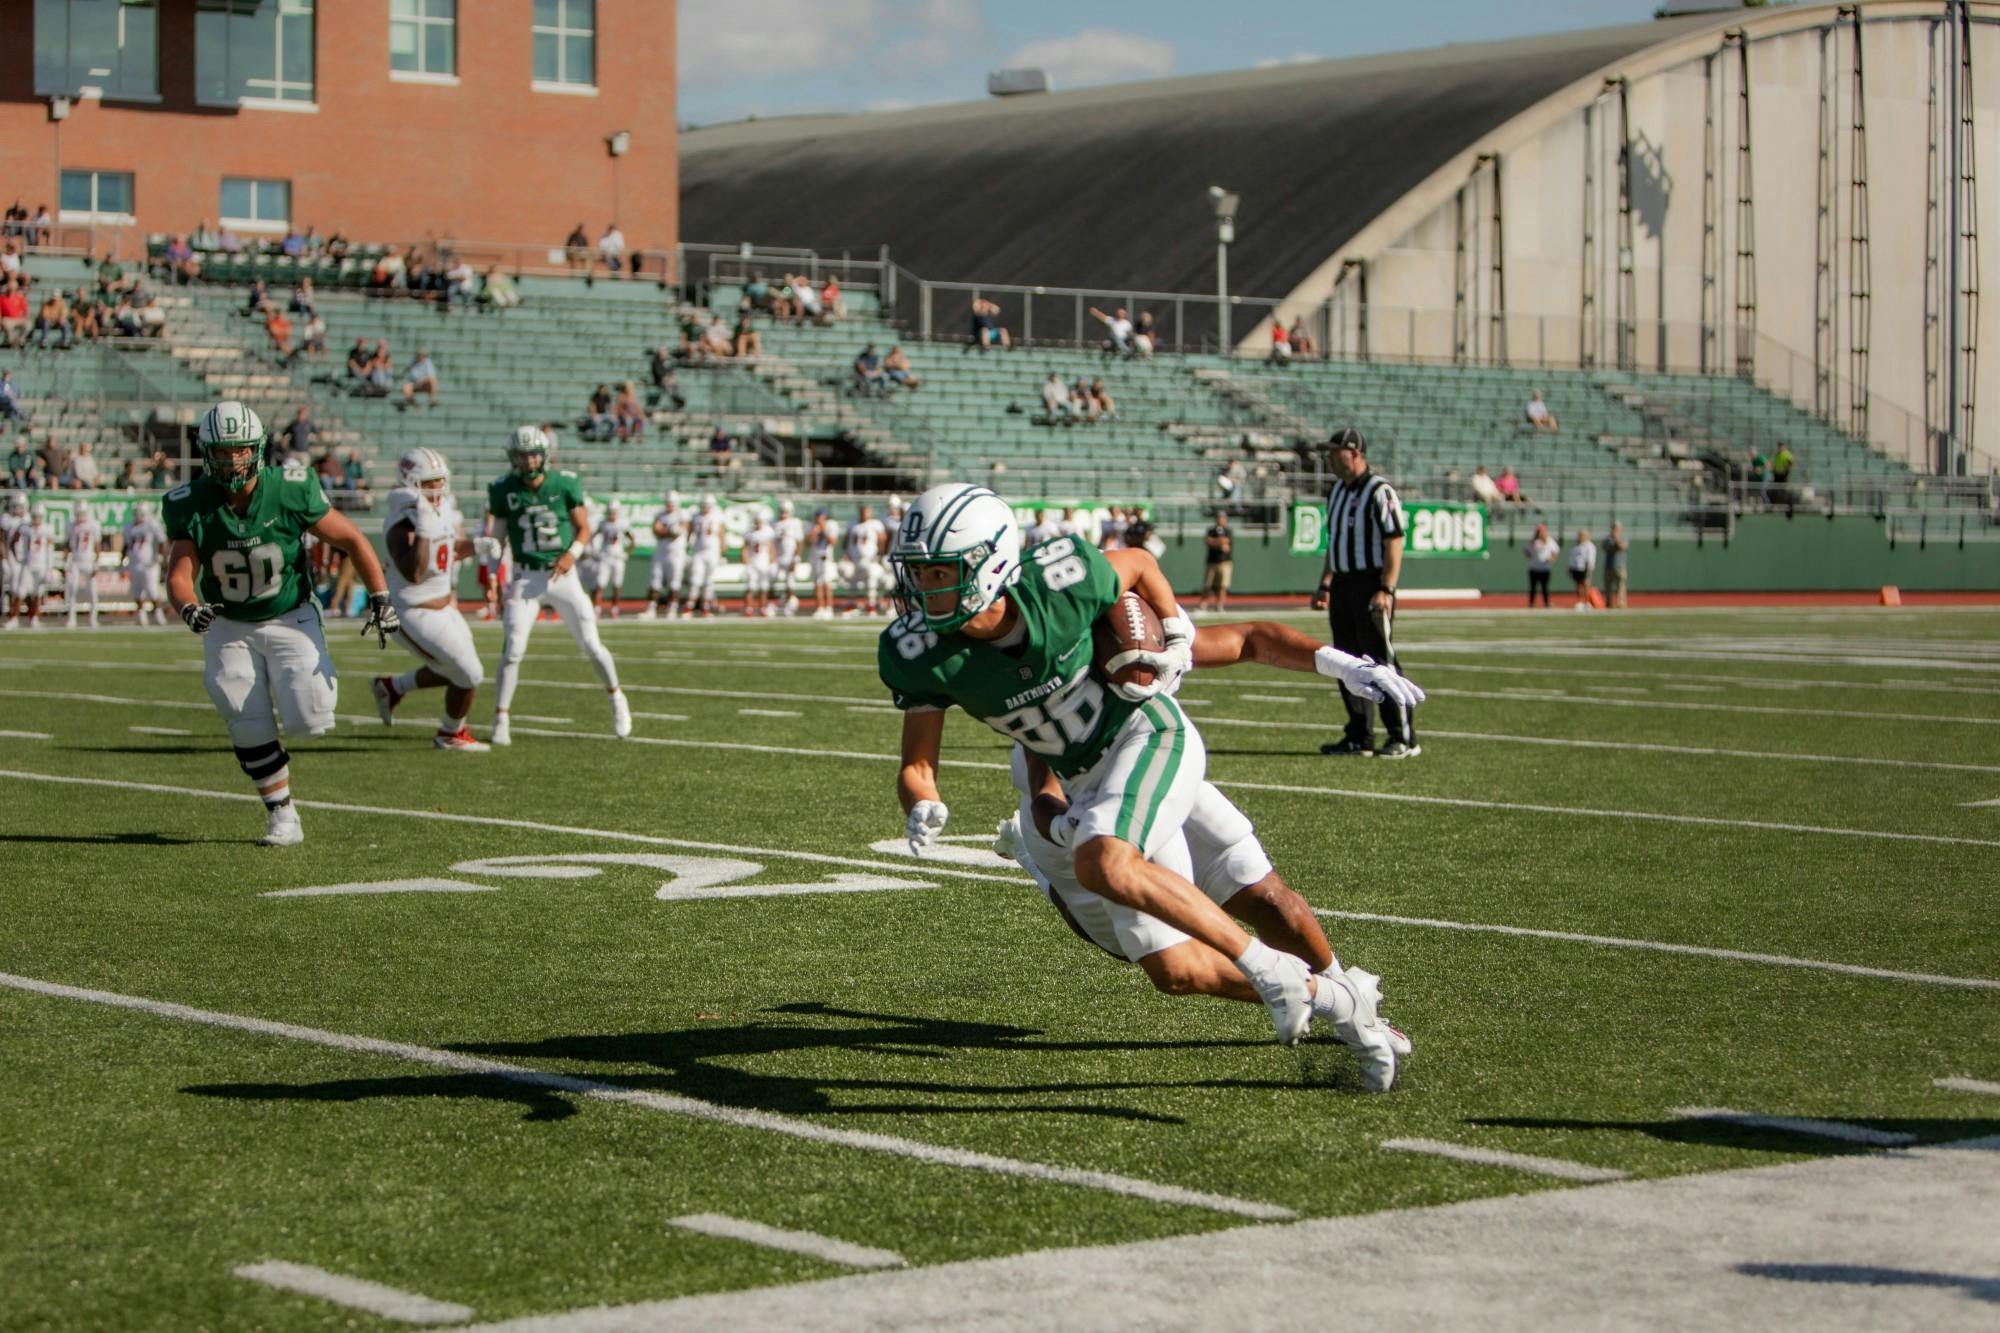 Paxton Scott '24 scored Dartmouth's first touchdown on Saturday. Through two weeks, he now has 10 catches for 95 yards and two scores.